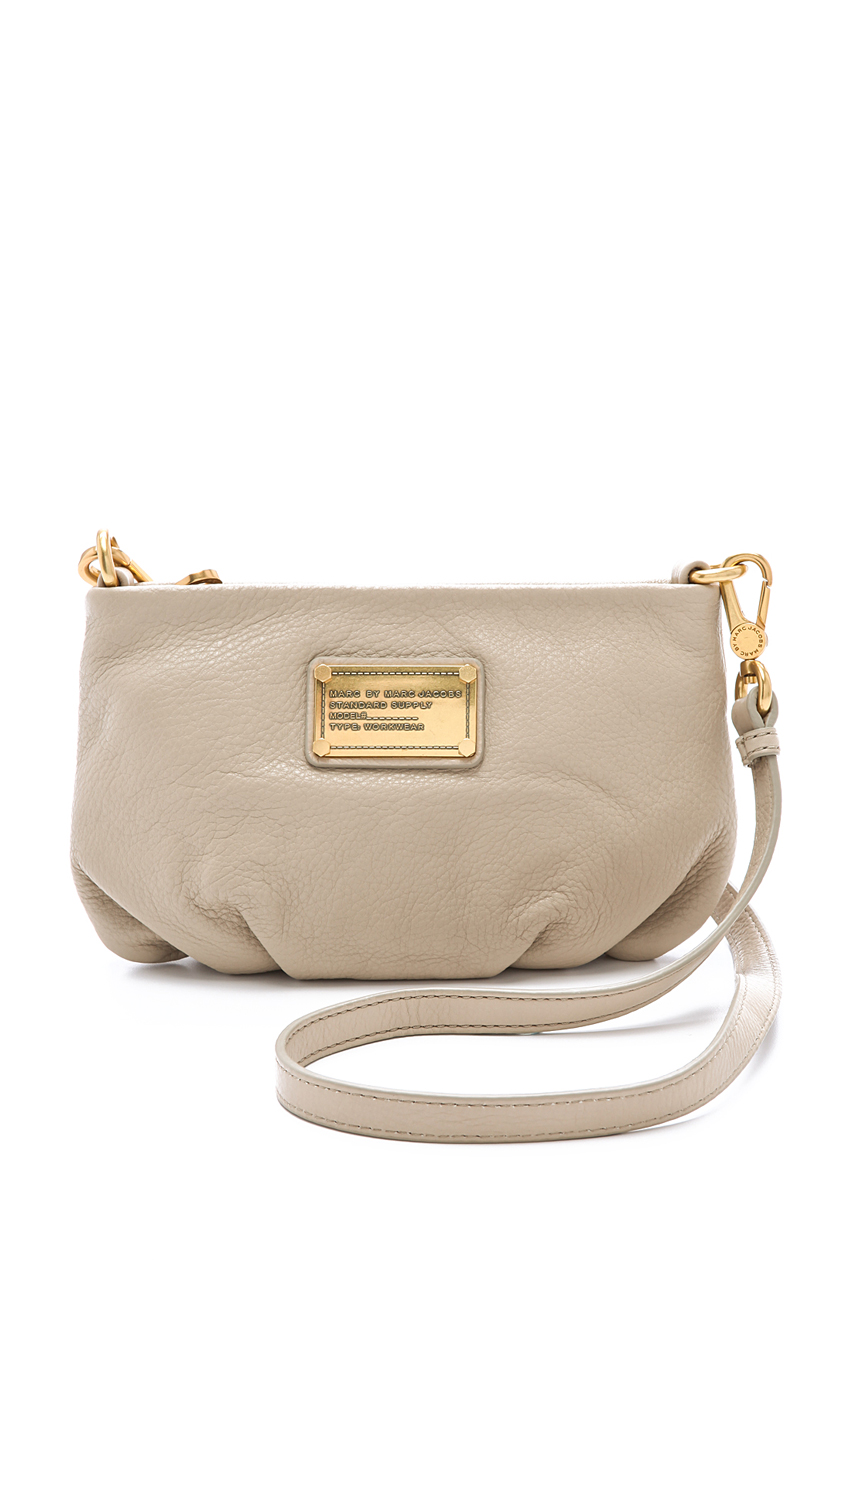 Marc By Marc Jacobs Classic Q Percy Cross Body Bag in Natural - Lyst